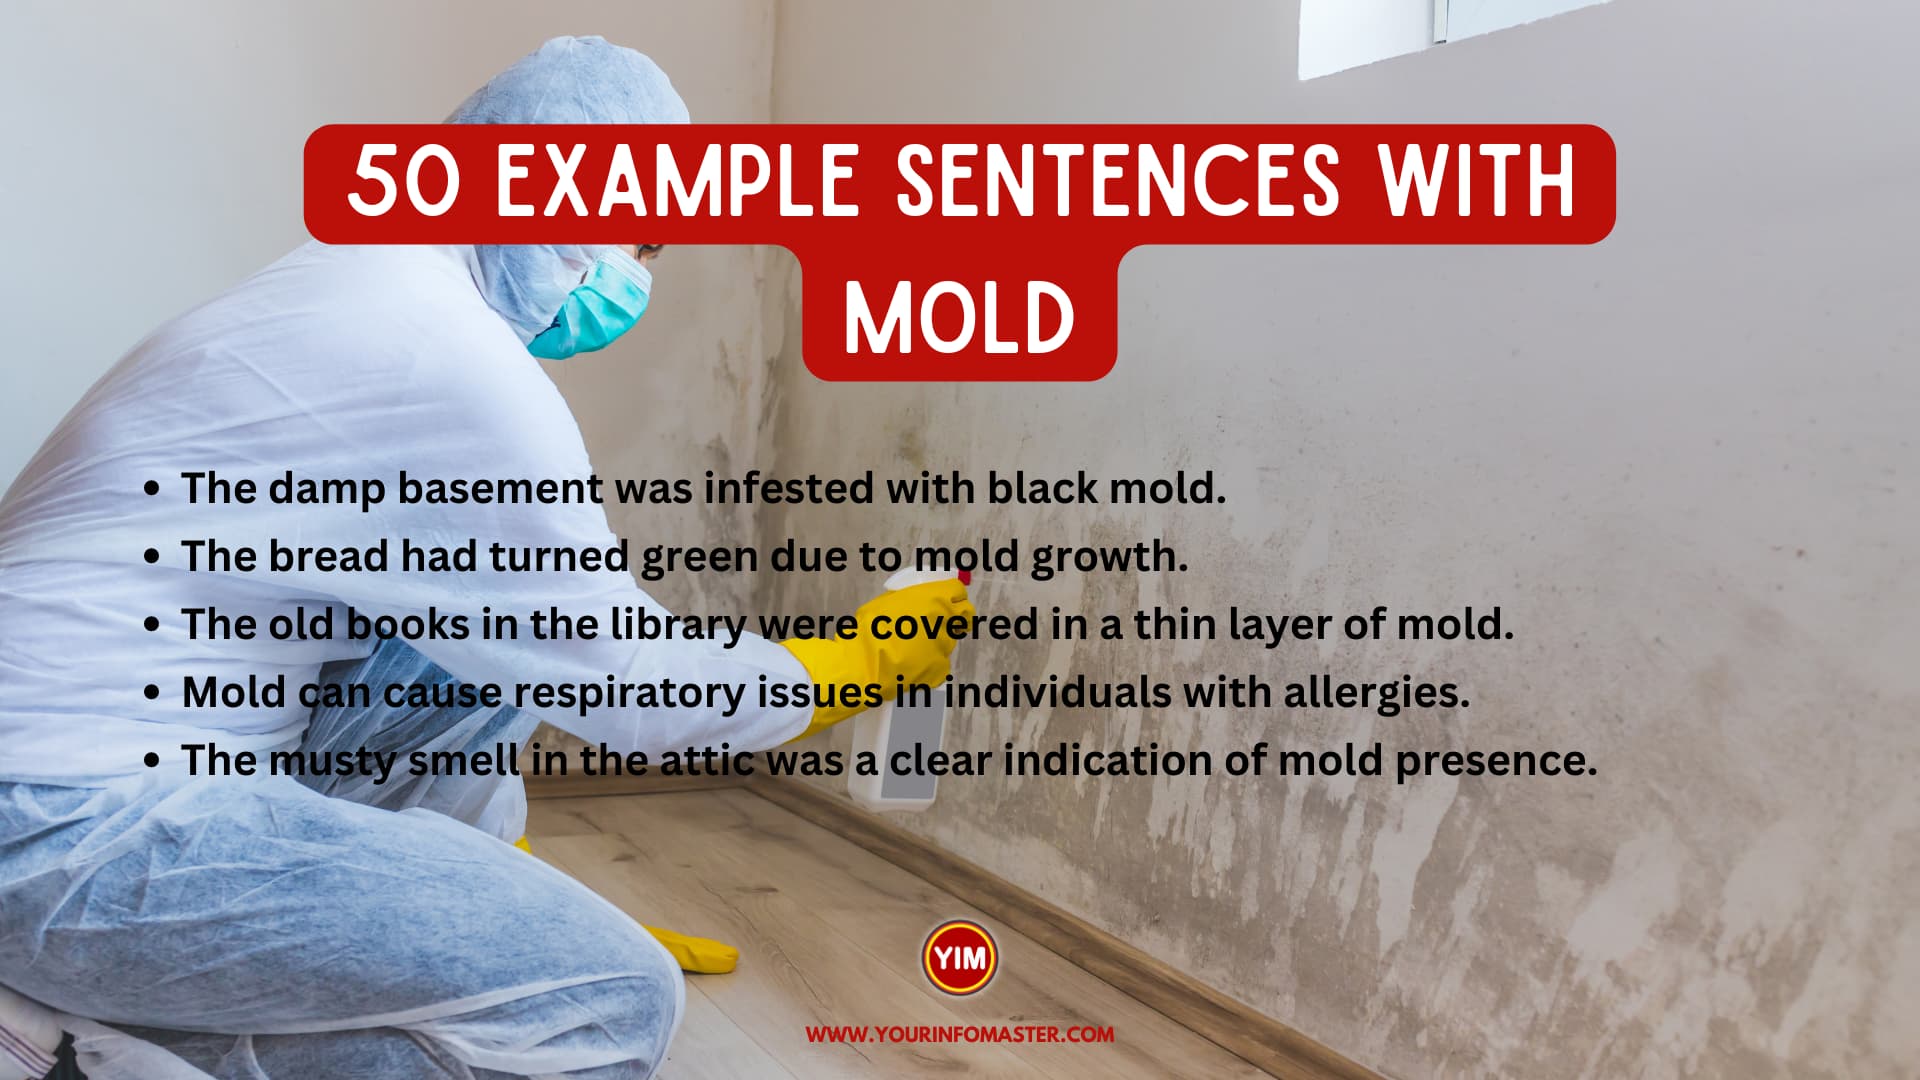 50 Sentences with Mold